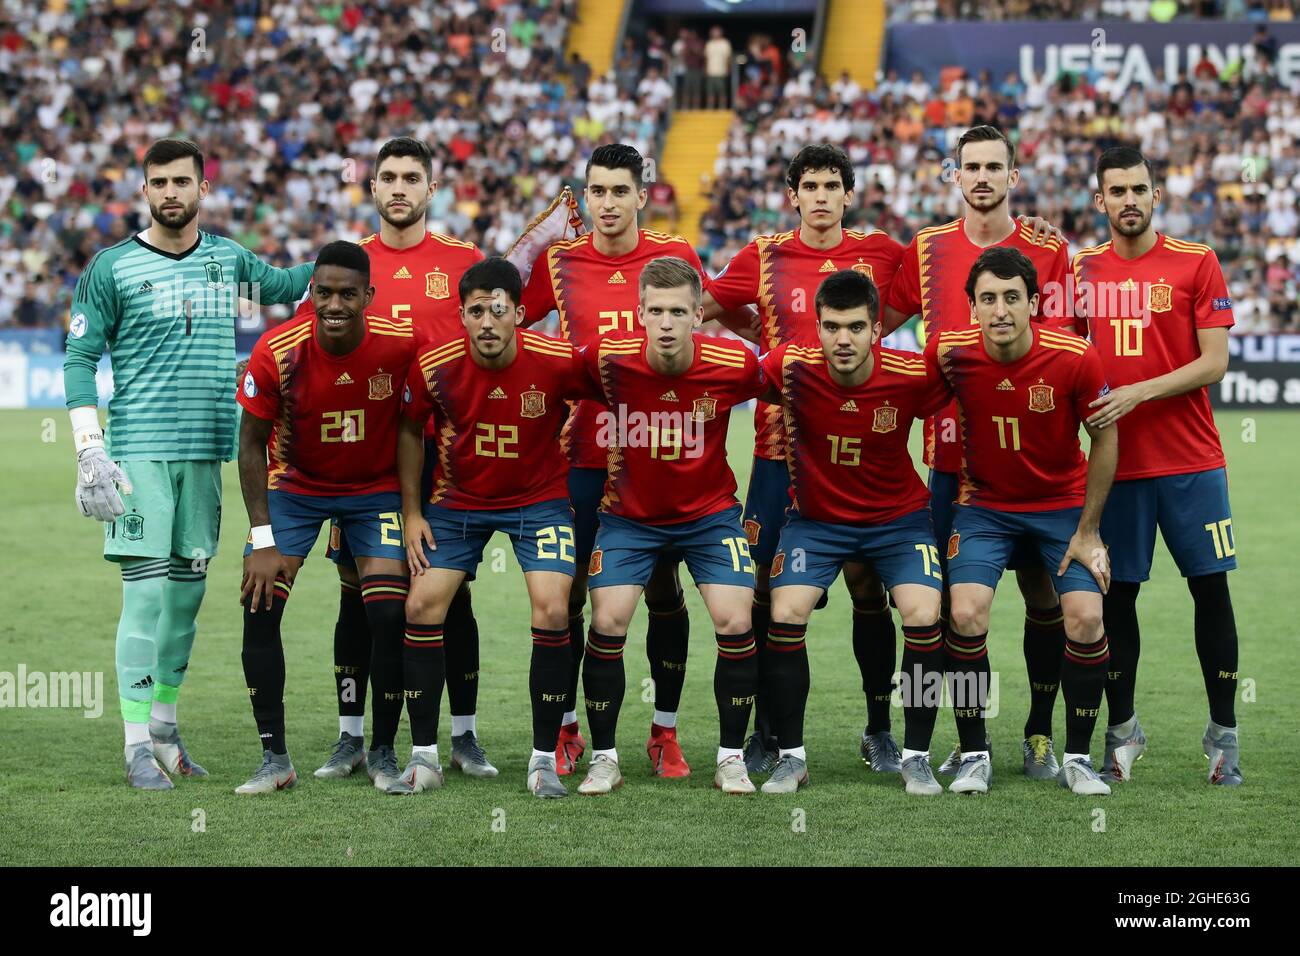 The Spain starting eleven line up for a team photo, back row ( L to R ); Antonio Sivera, Unai Nunez, Marco Roca, Jesus Vallejo, Fabian Ruiz and Dani Ceballos, front row ( L to R ); Junior Firpo, Pablo Fornals, Dani Olmo, Martin Aguirregabriria Padilla and Mikel Oyarzabal, before the UEFA Under-21 Championship match at Stadio Friuli. Picture date: 30th June 2019. Picture credit should read: Jonathan Moscrop/Sportimage via PA Images Stock Photo